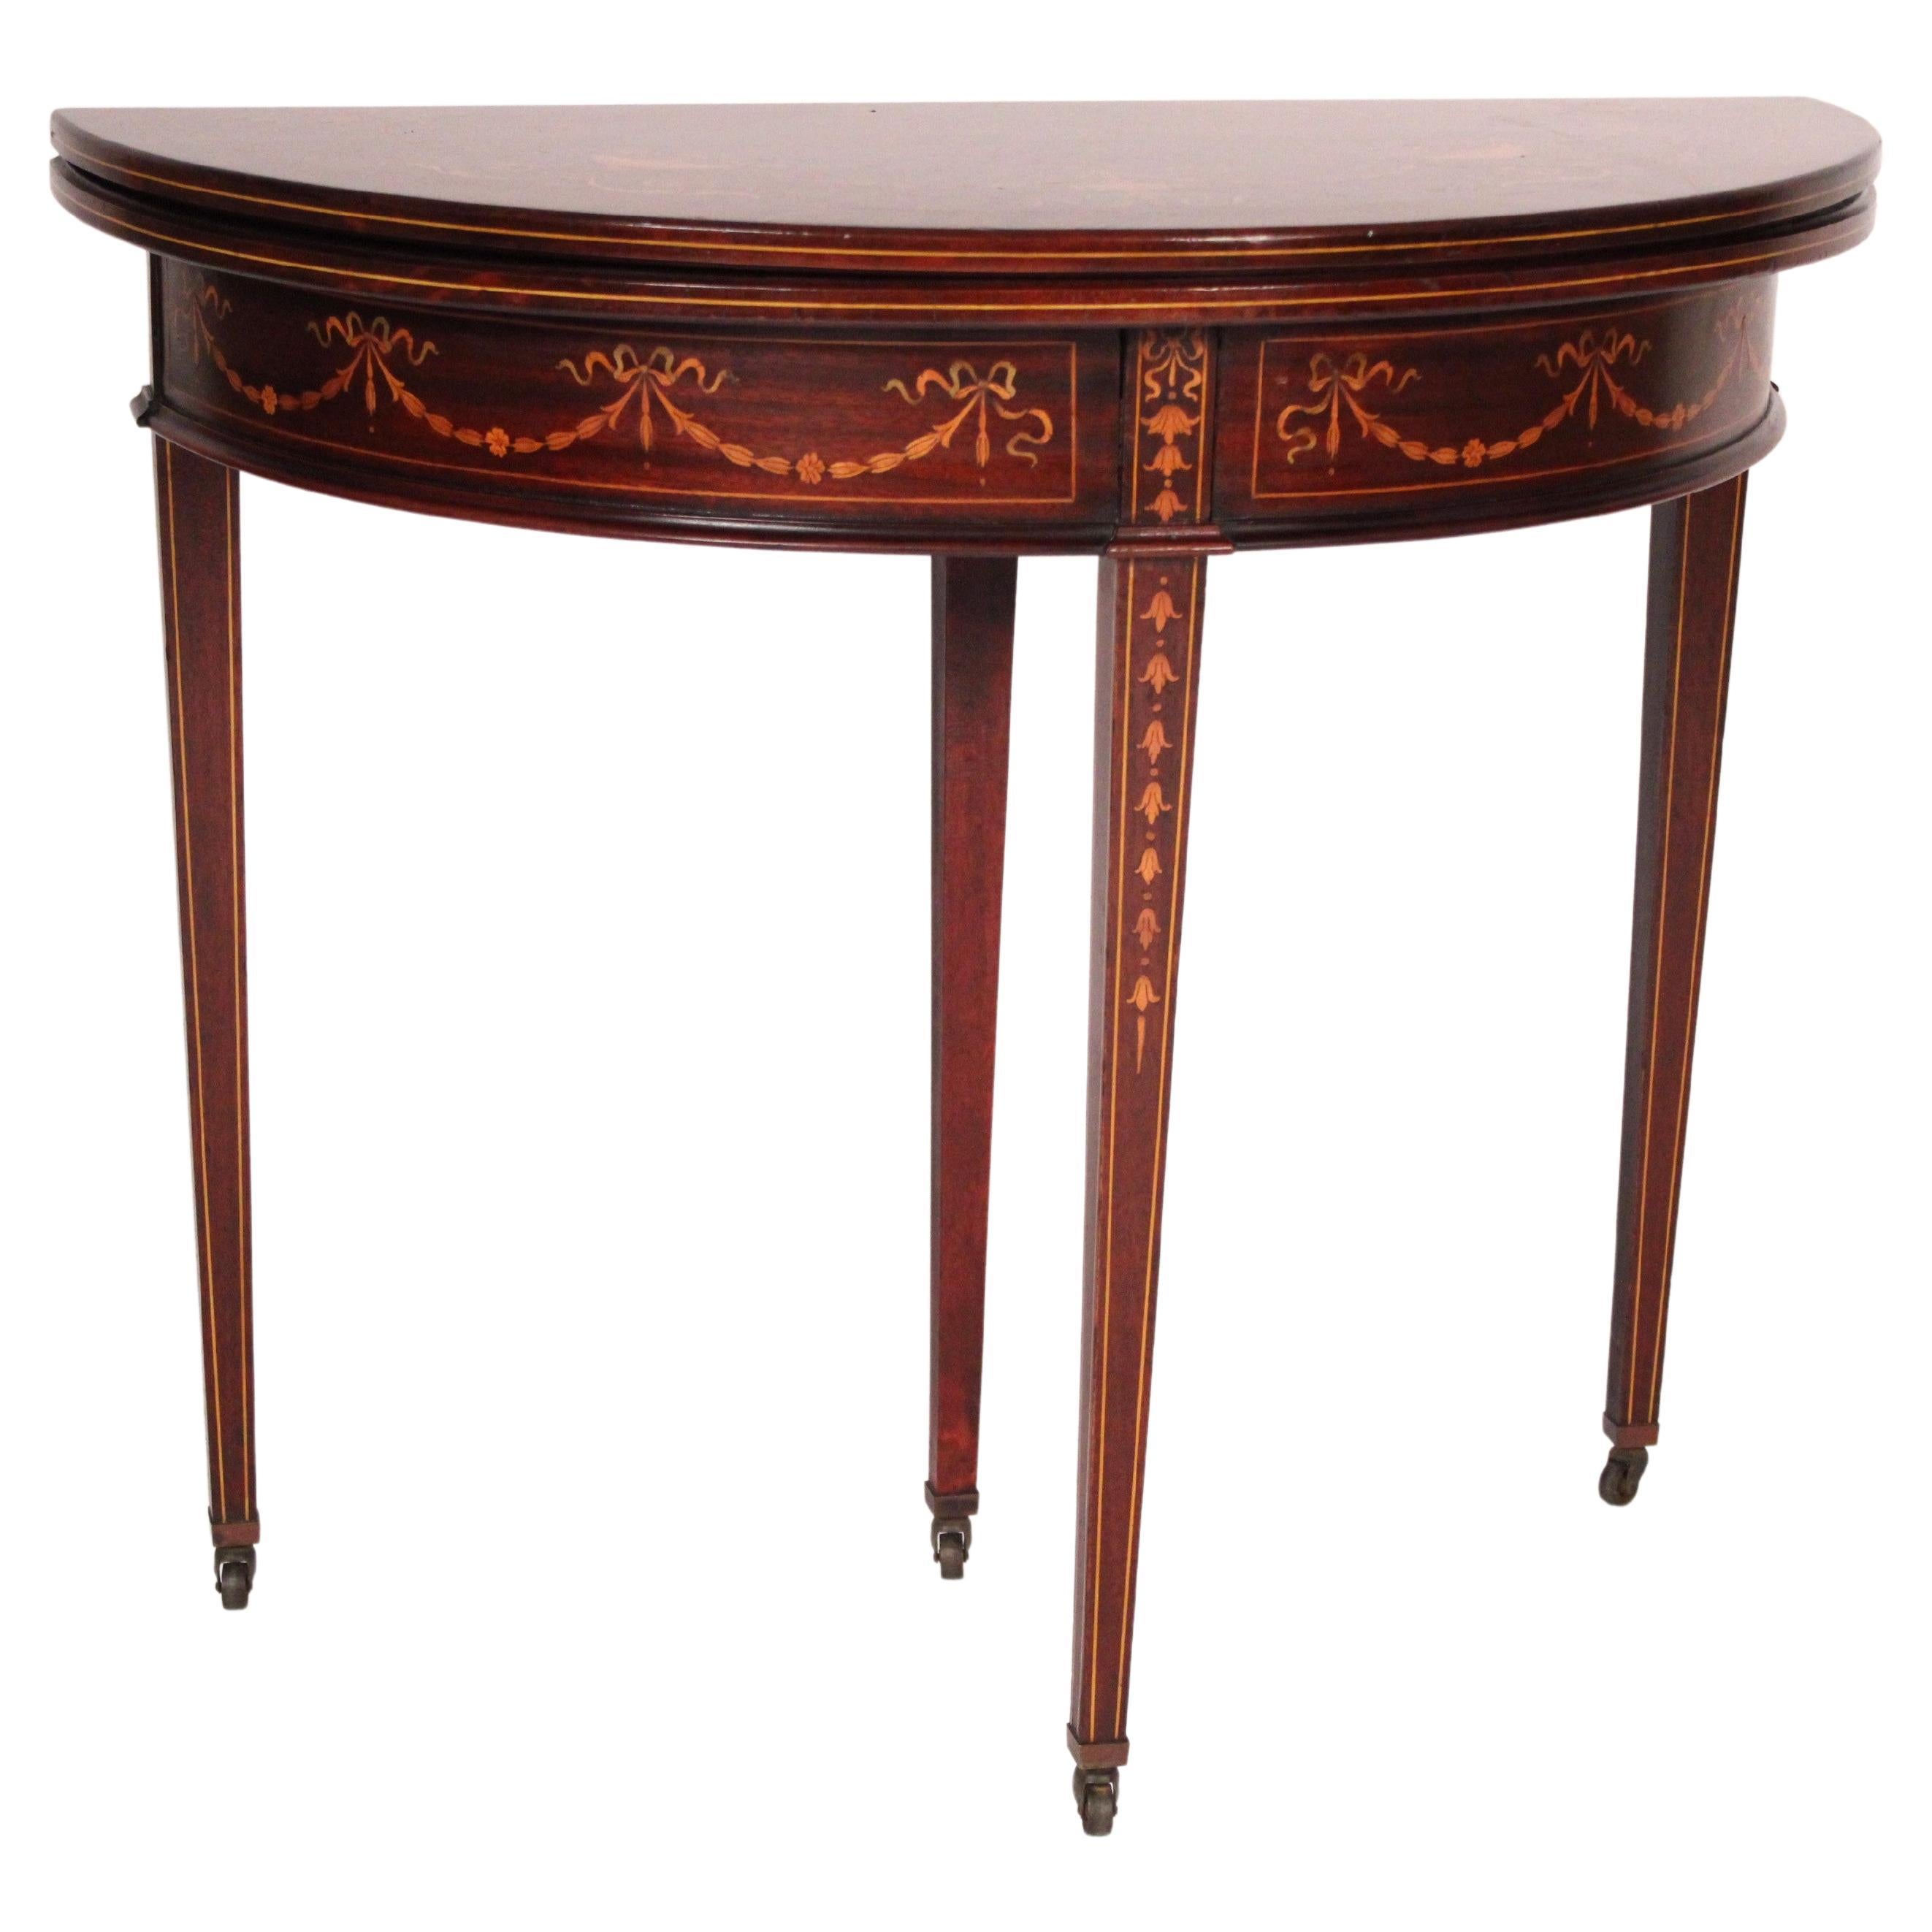 English Edwardian Mahogany Inlaid Console / Games Table For Sale